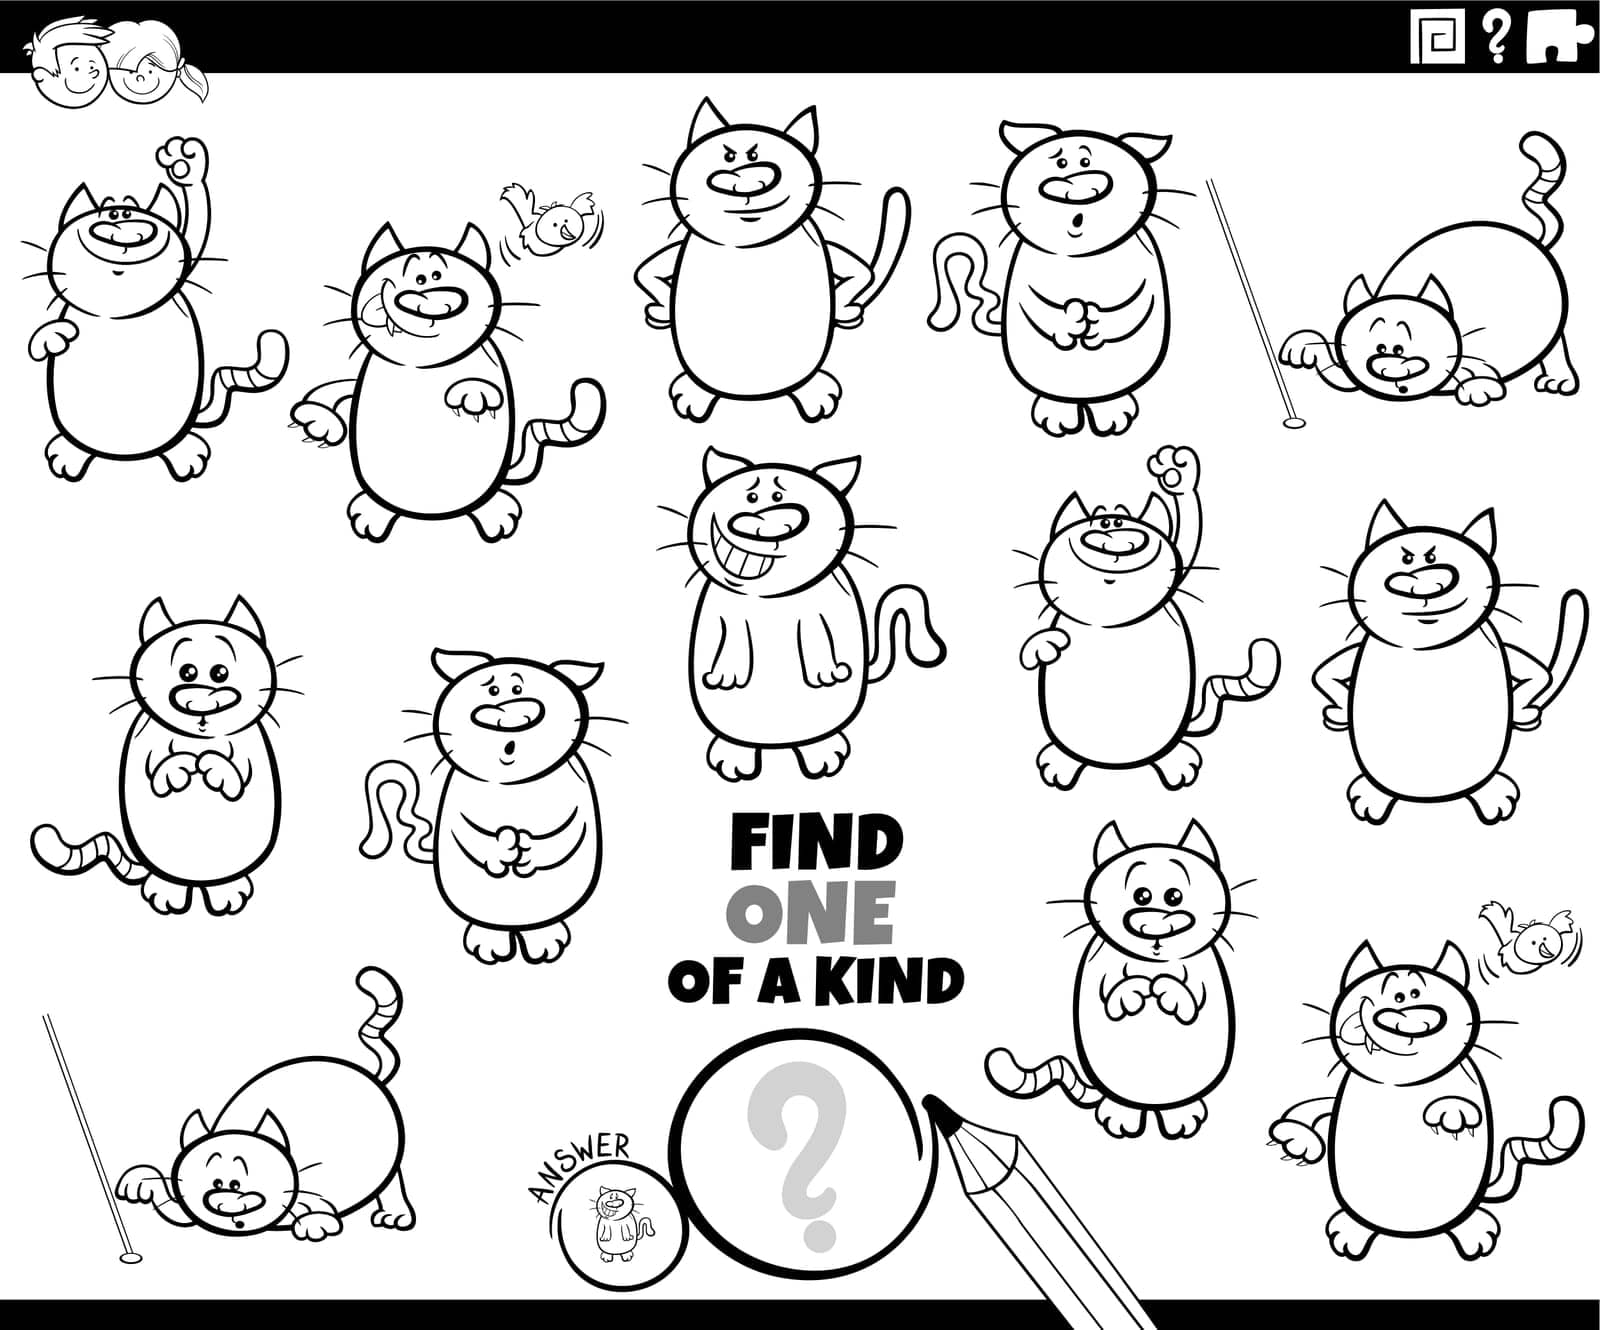 one of a kind game with cartoon cats coloring page by izakowski